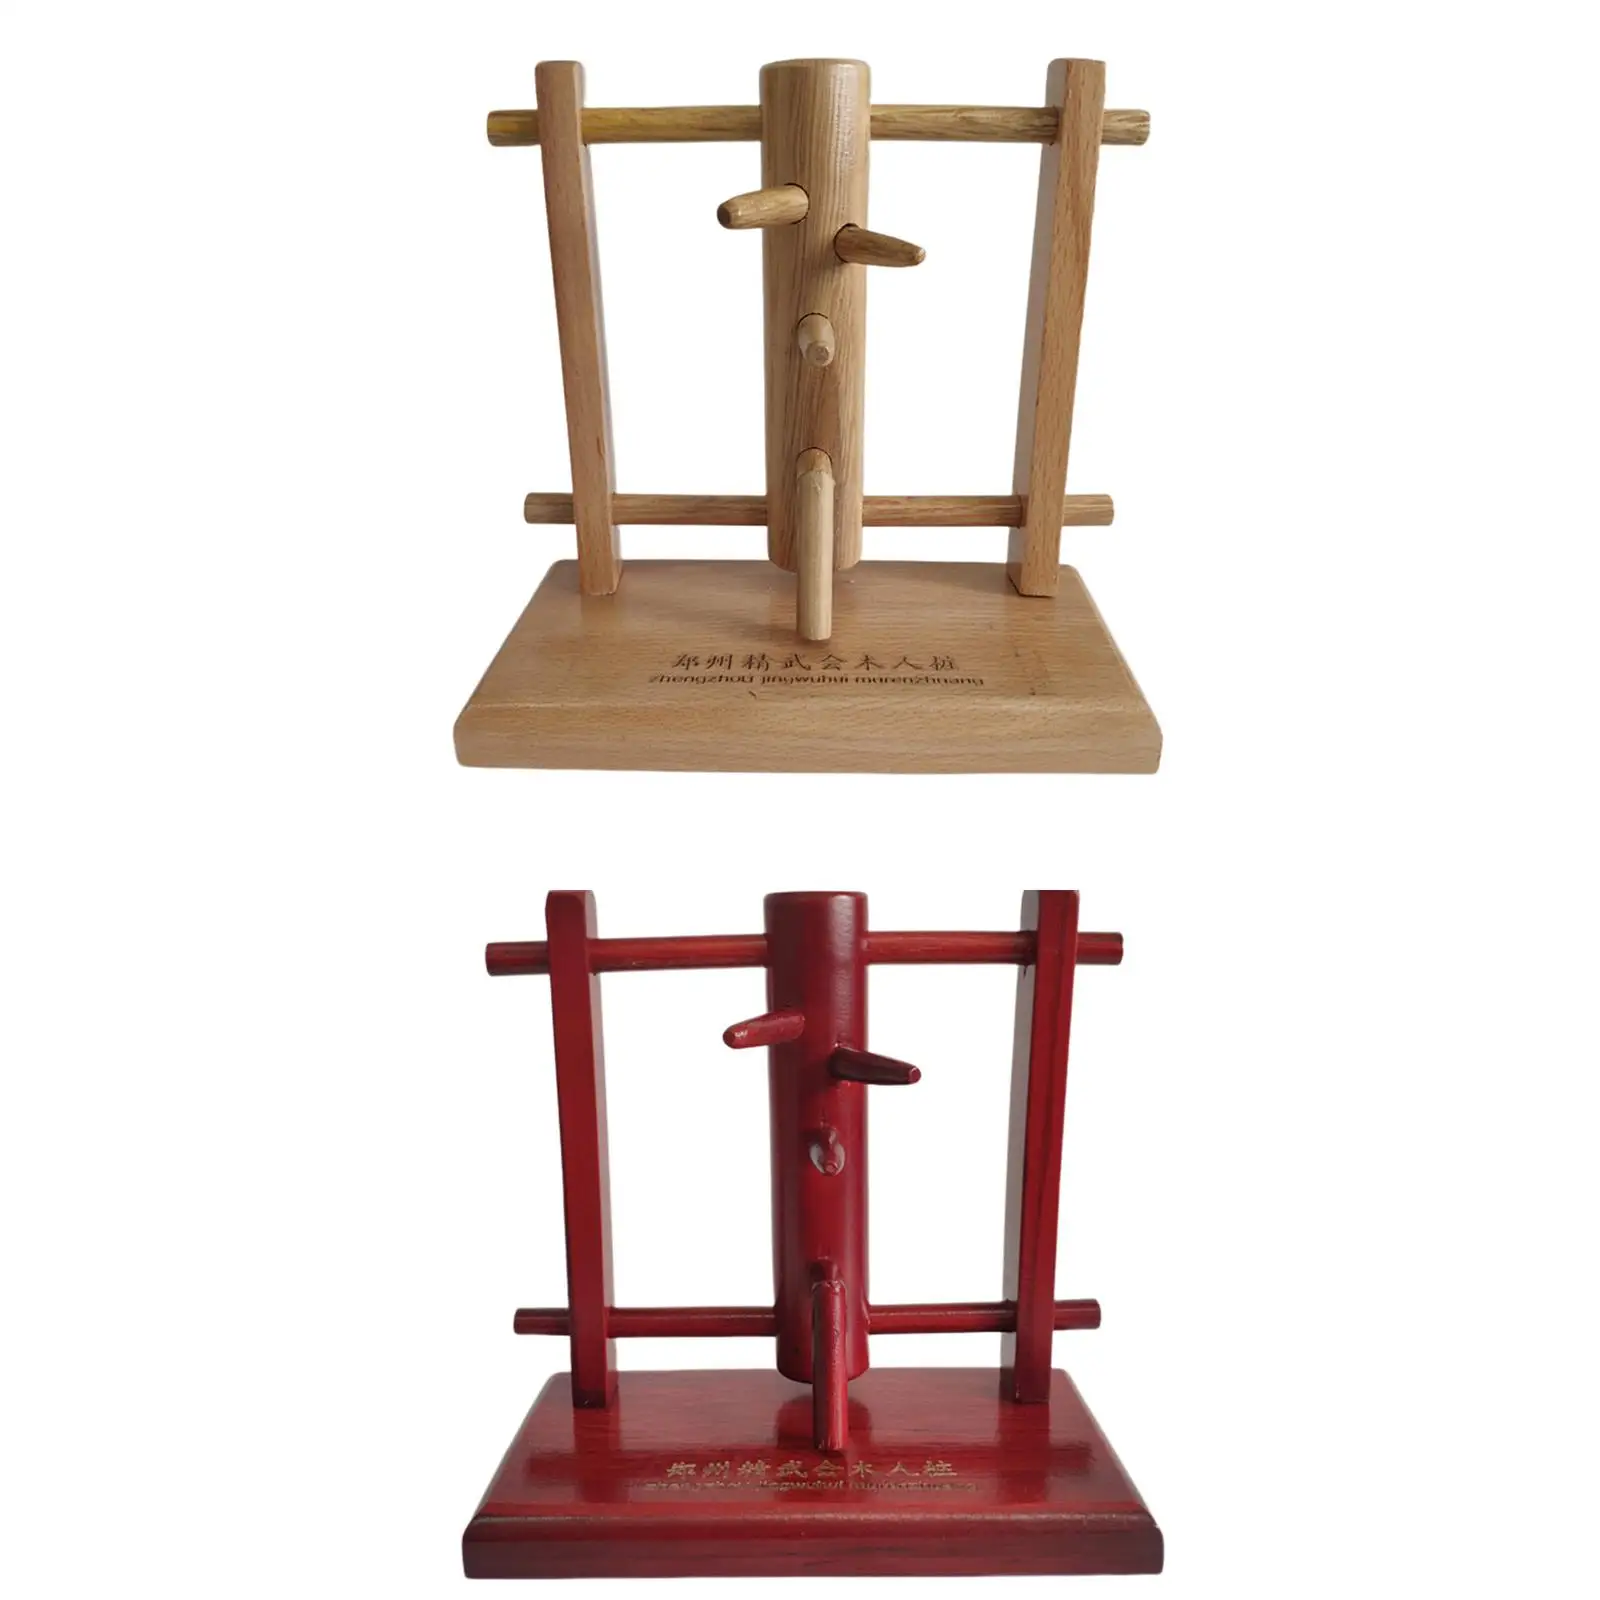 Model Wing Chun Mini Wooden Decor Crafts Collectible Collection Statue for Table